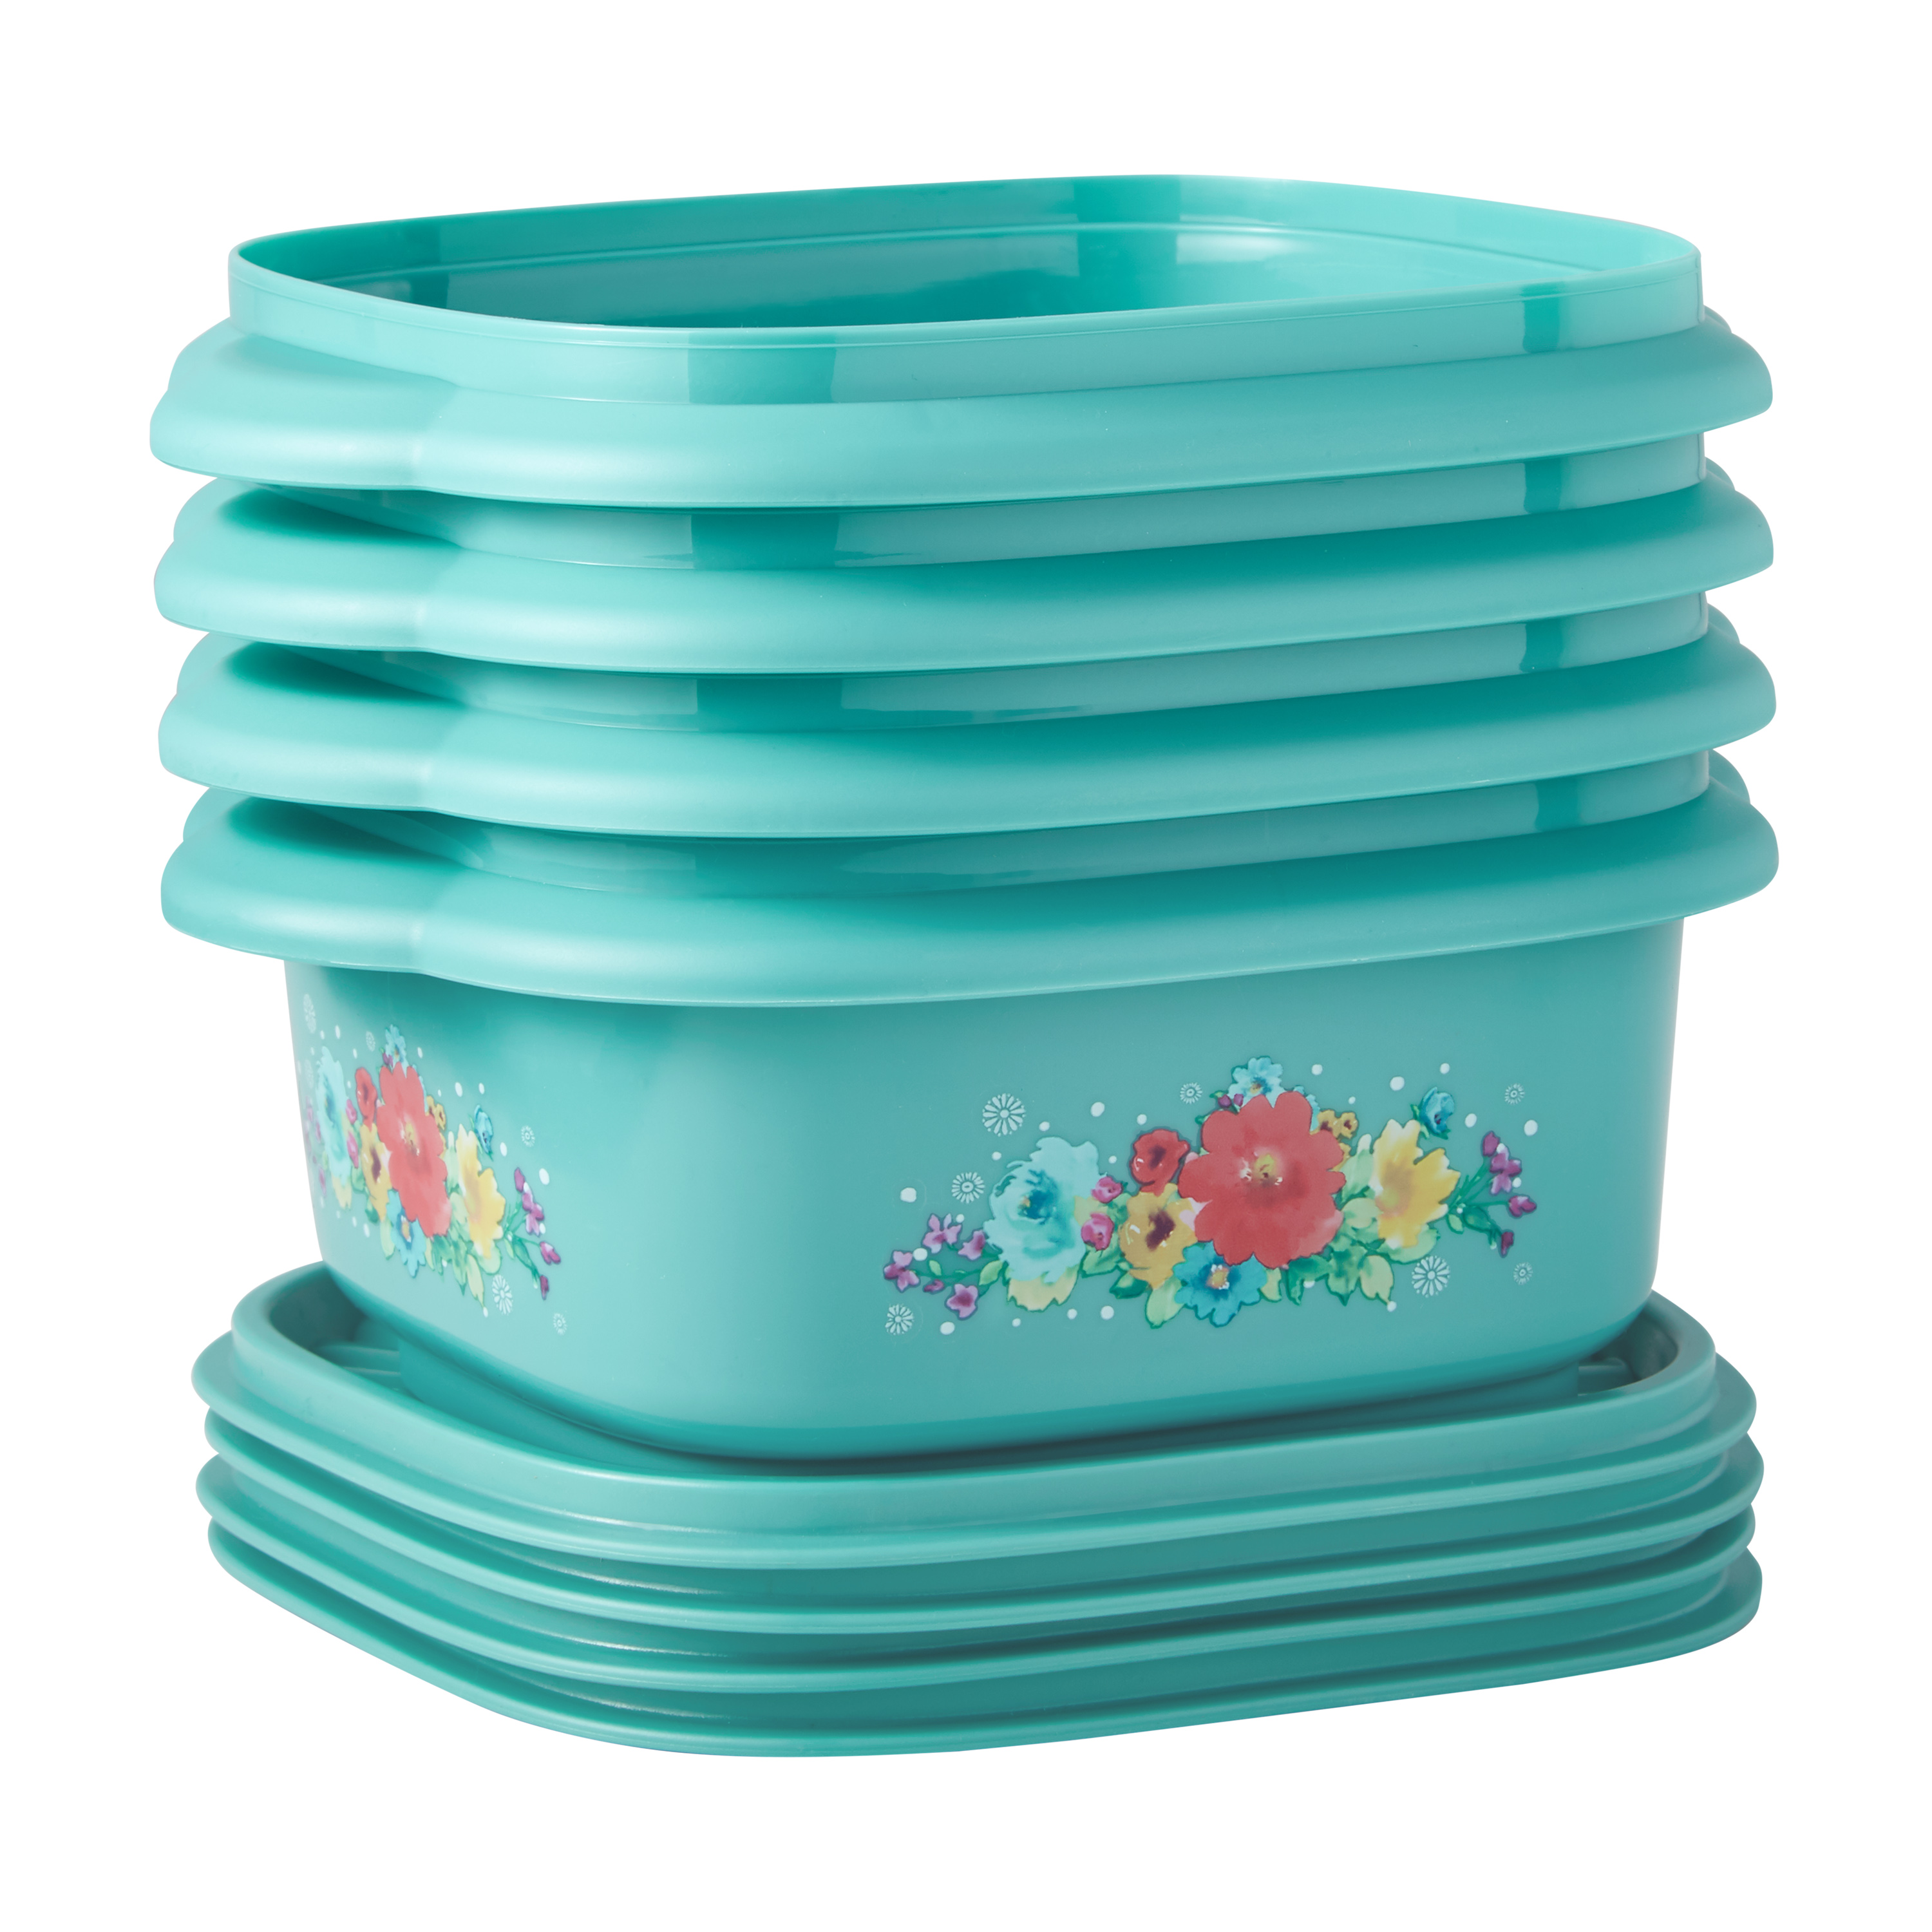 The Pioneer Woman 20 Piece Plastic Food Storage Container Variety Set, Breezy Blossom - image 4 of 5